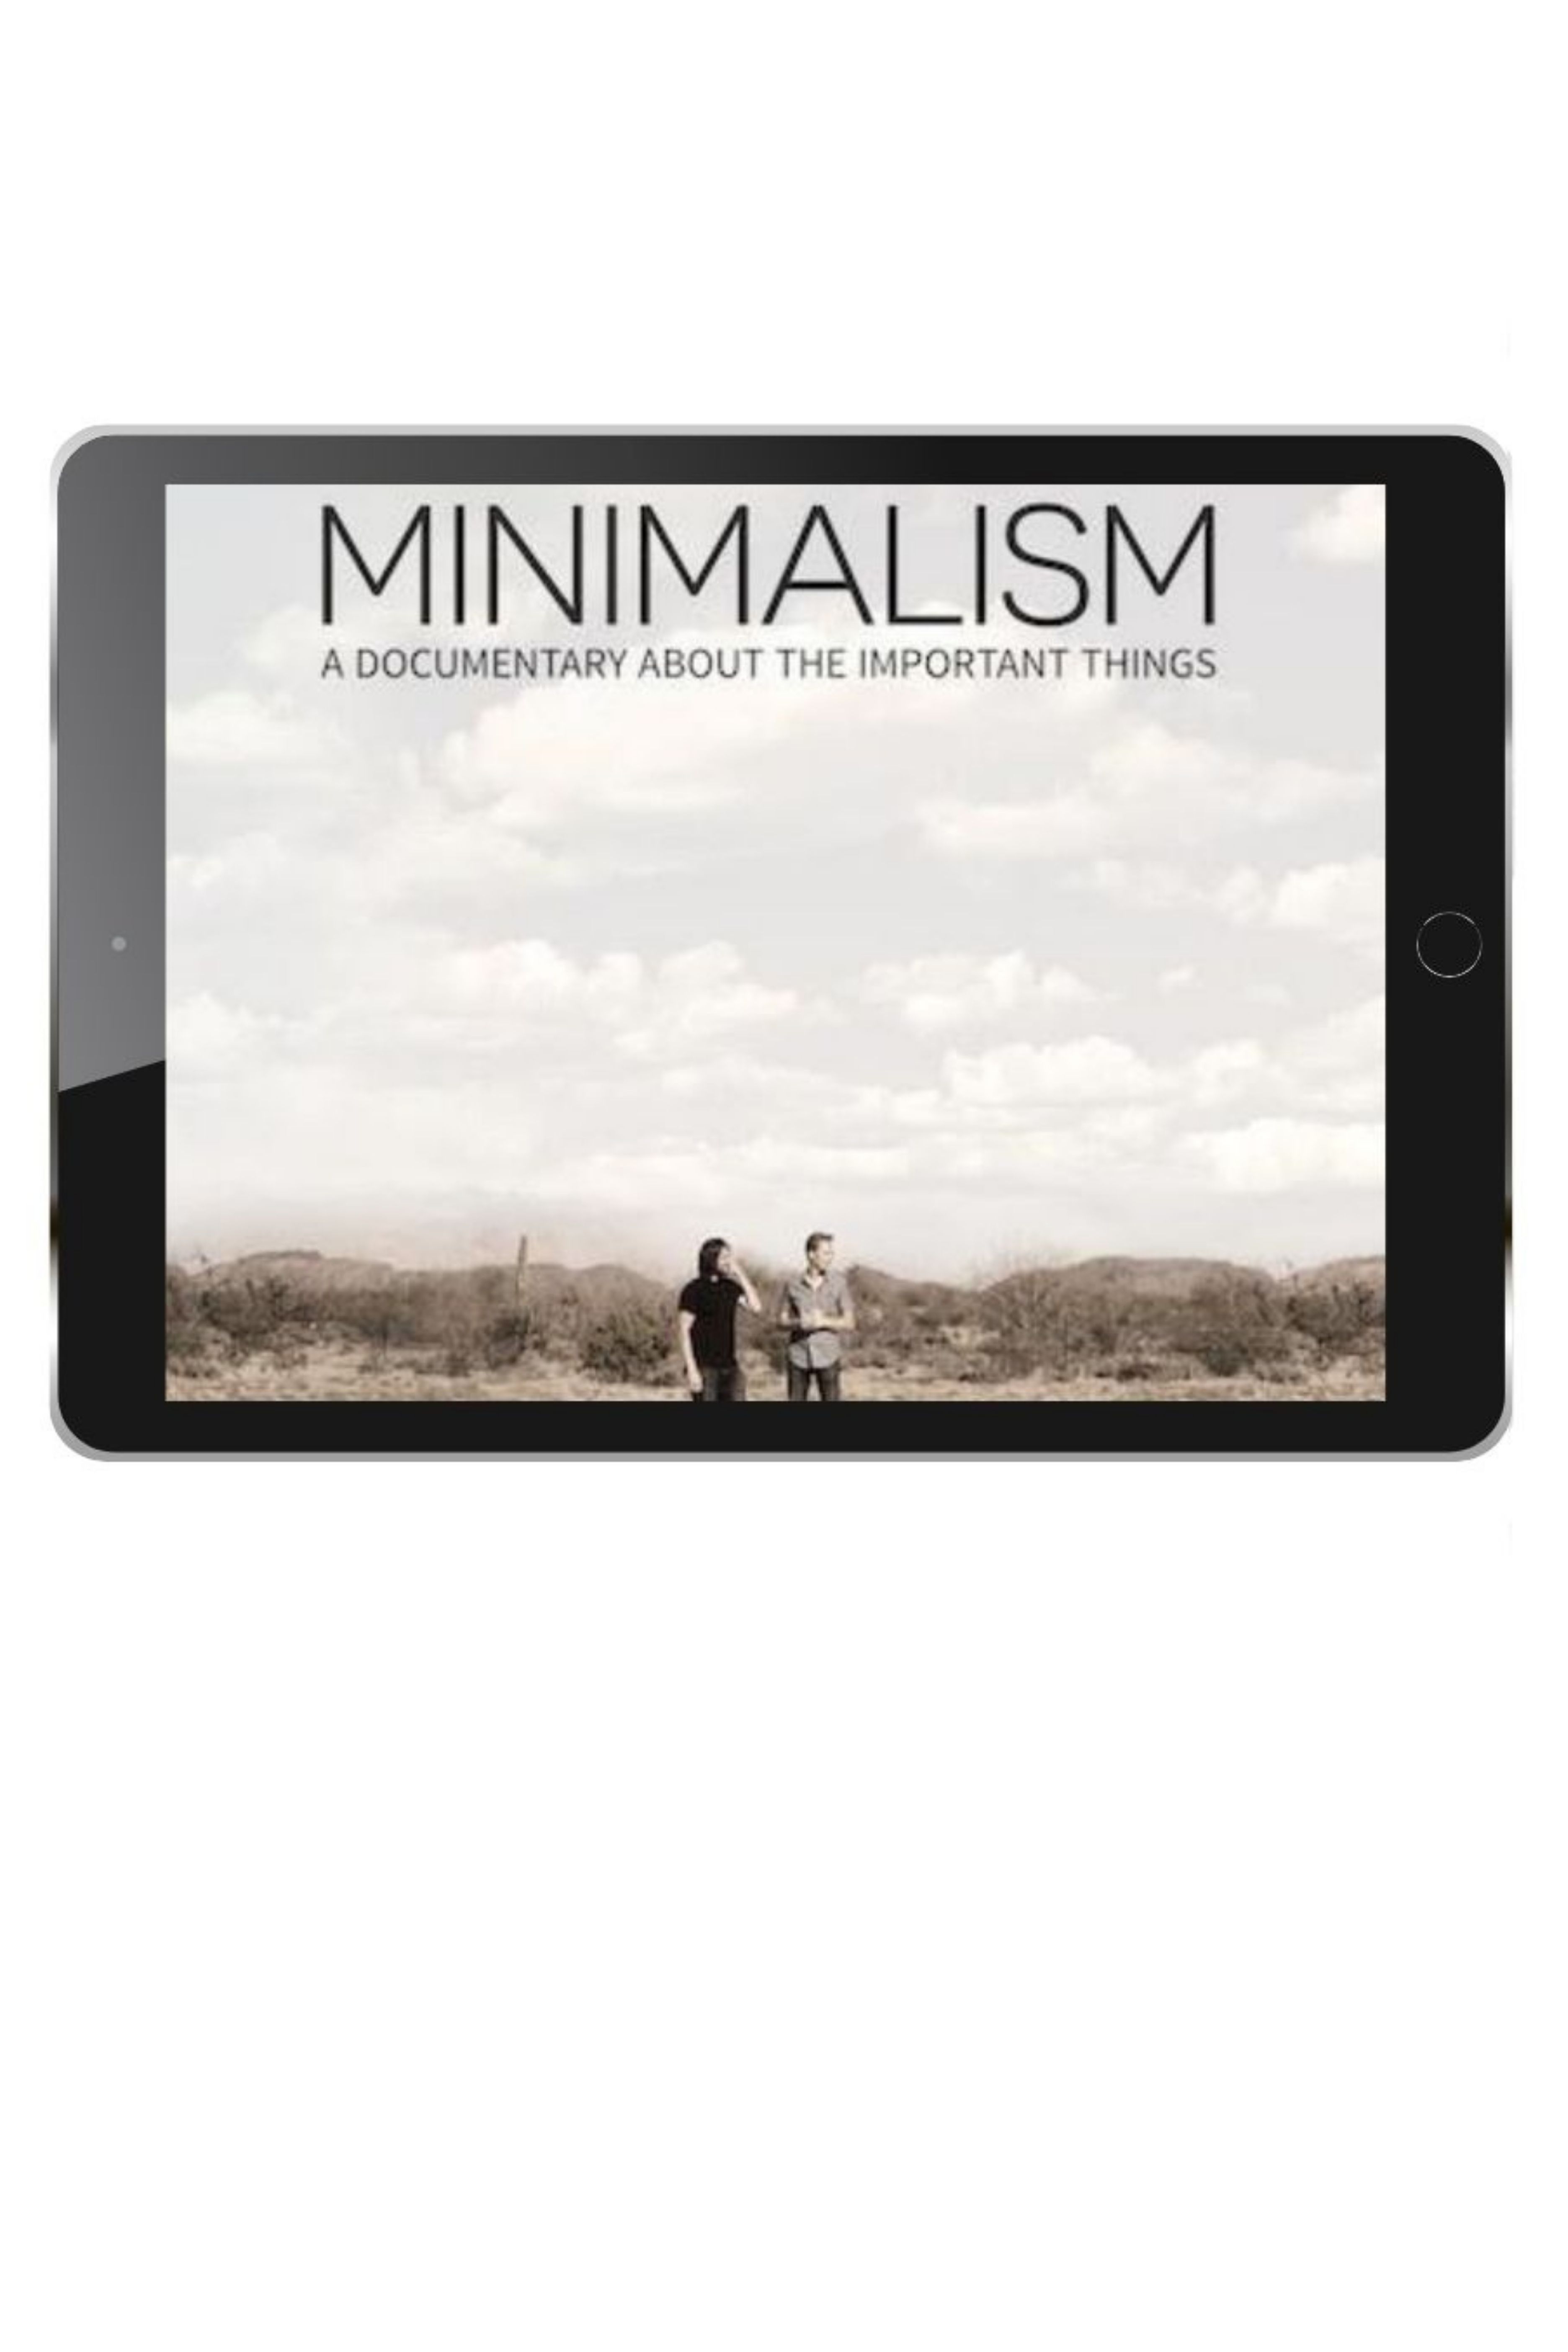 Minimalism: A Documentary about the Important Things